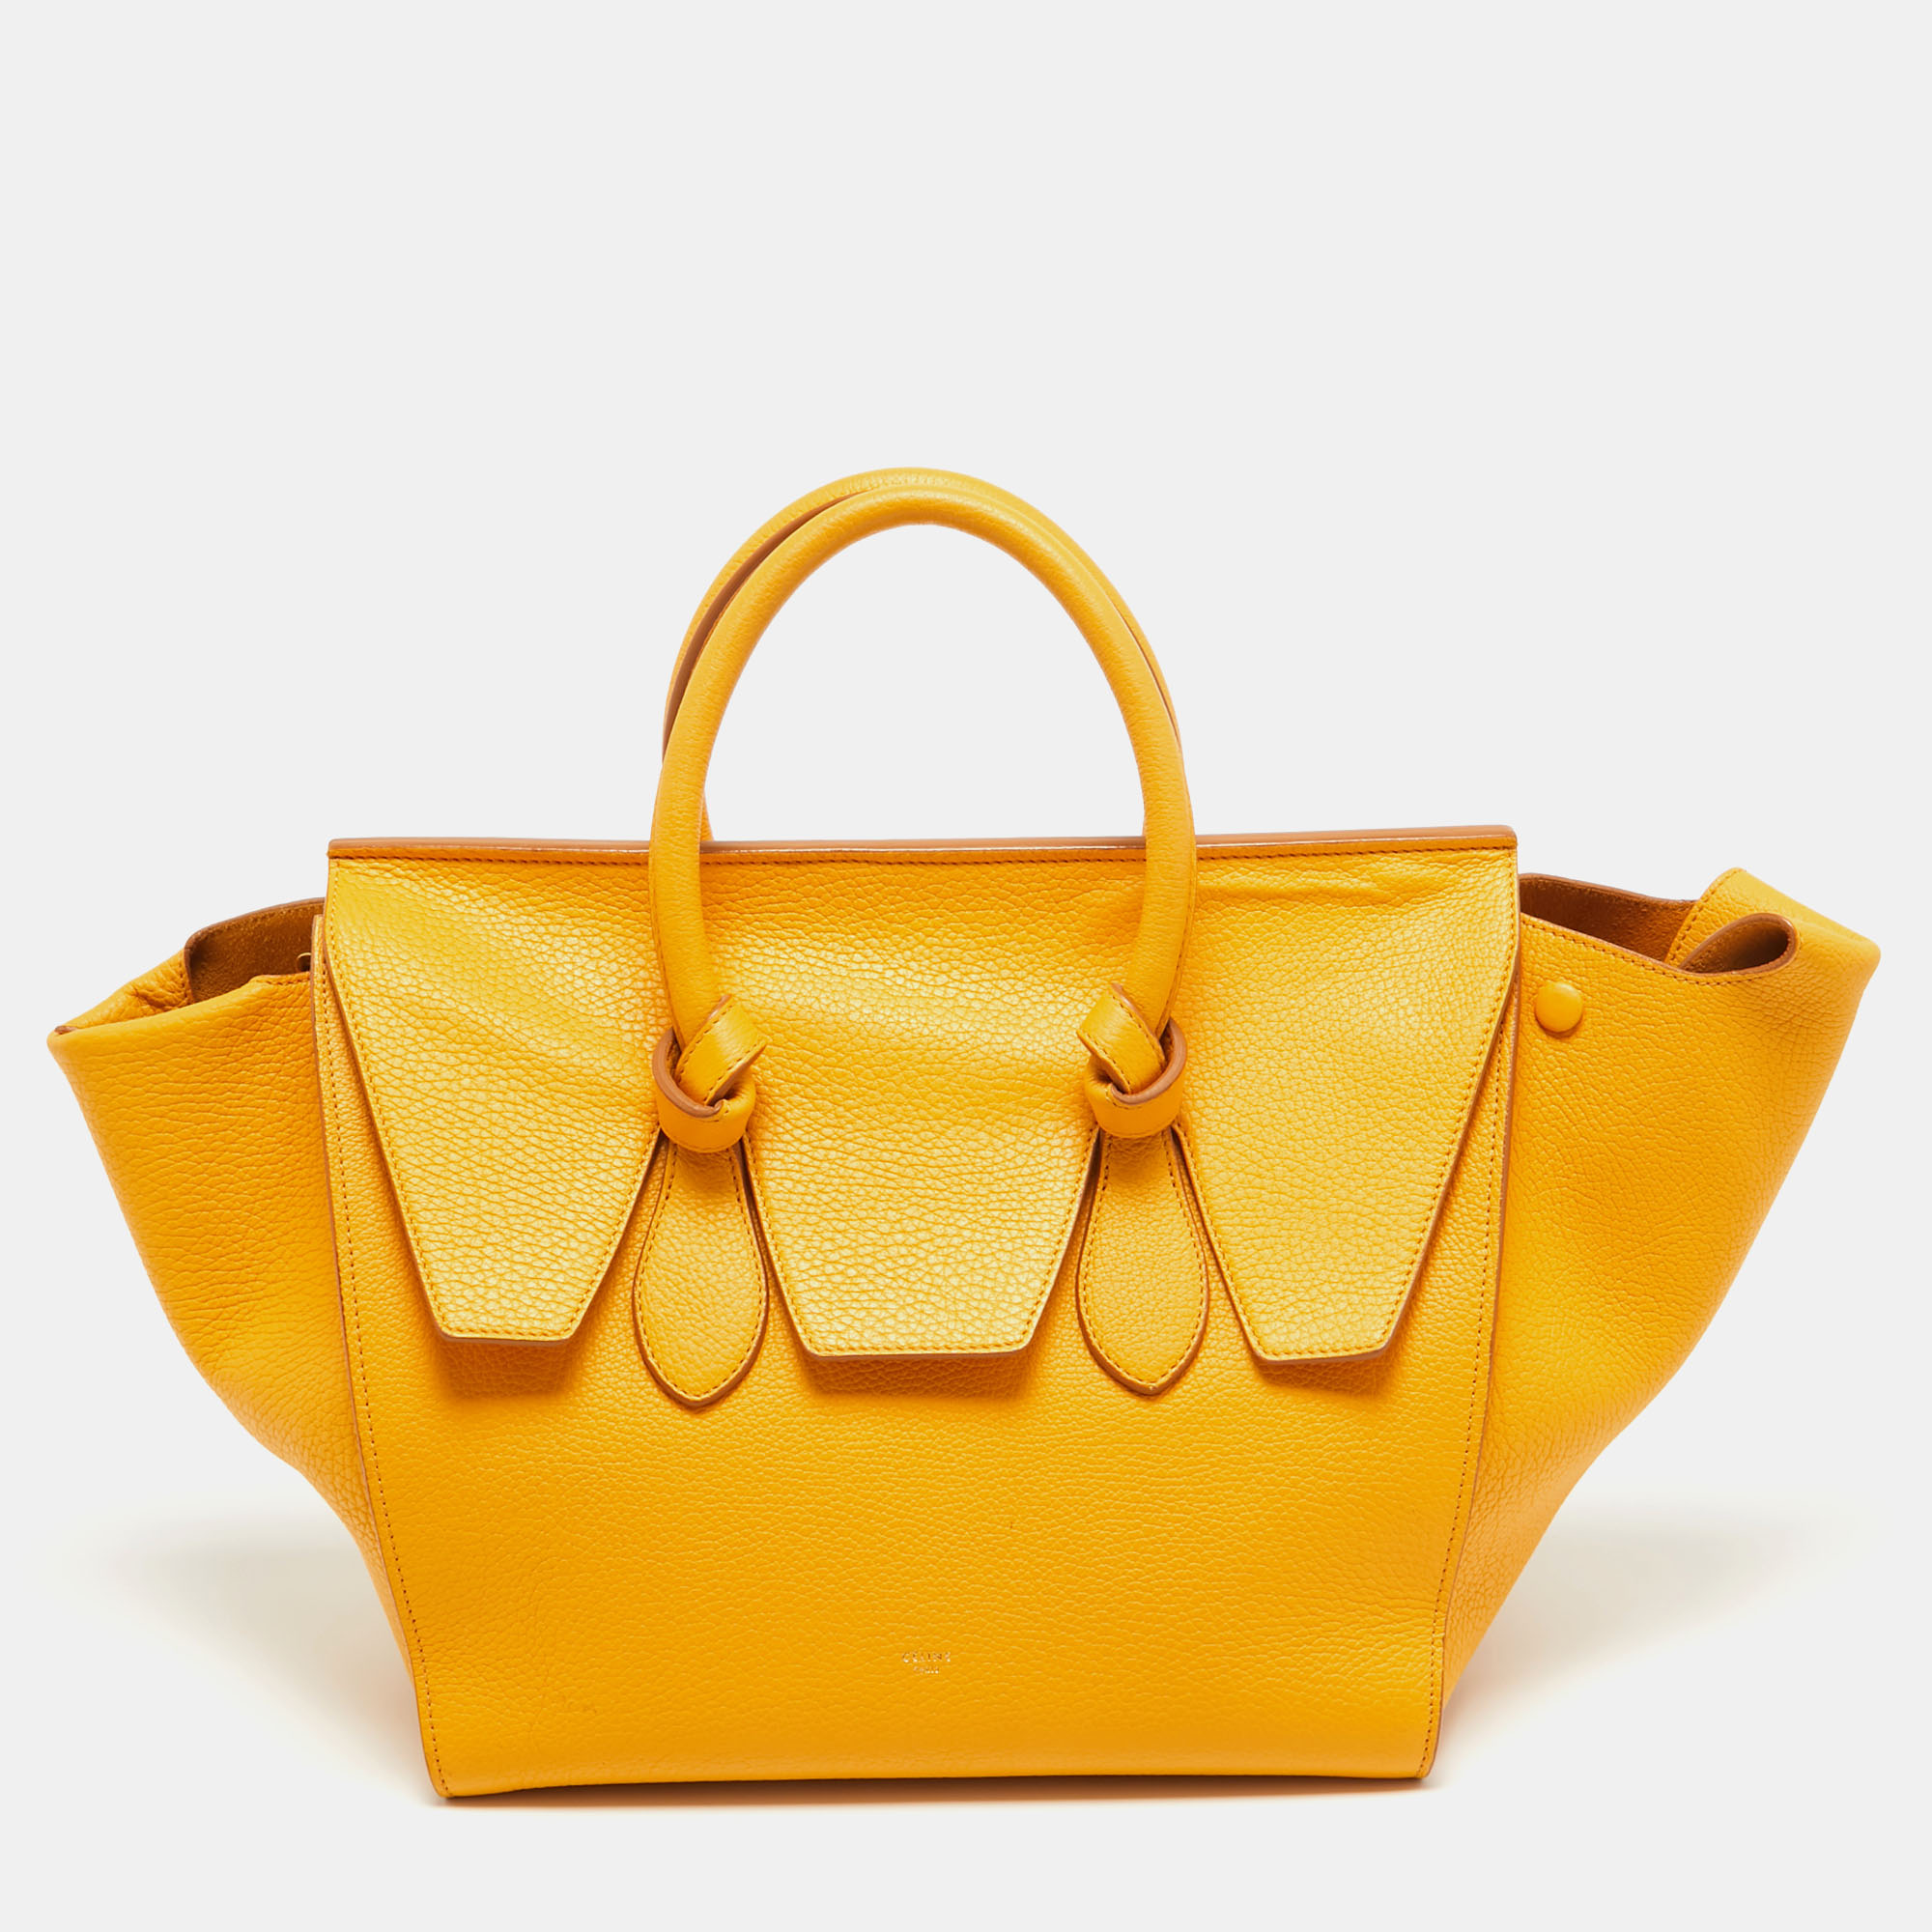 Perfect for conveniently housing your essentials in one place this Celine tote is a worthy investment. It has notable details and offers a look of luxury.